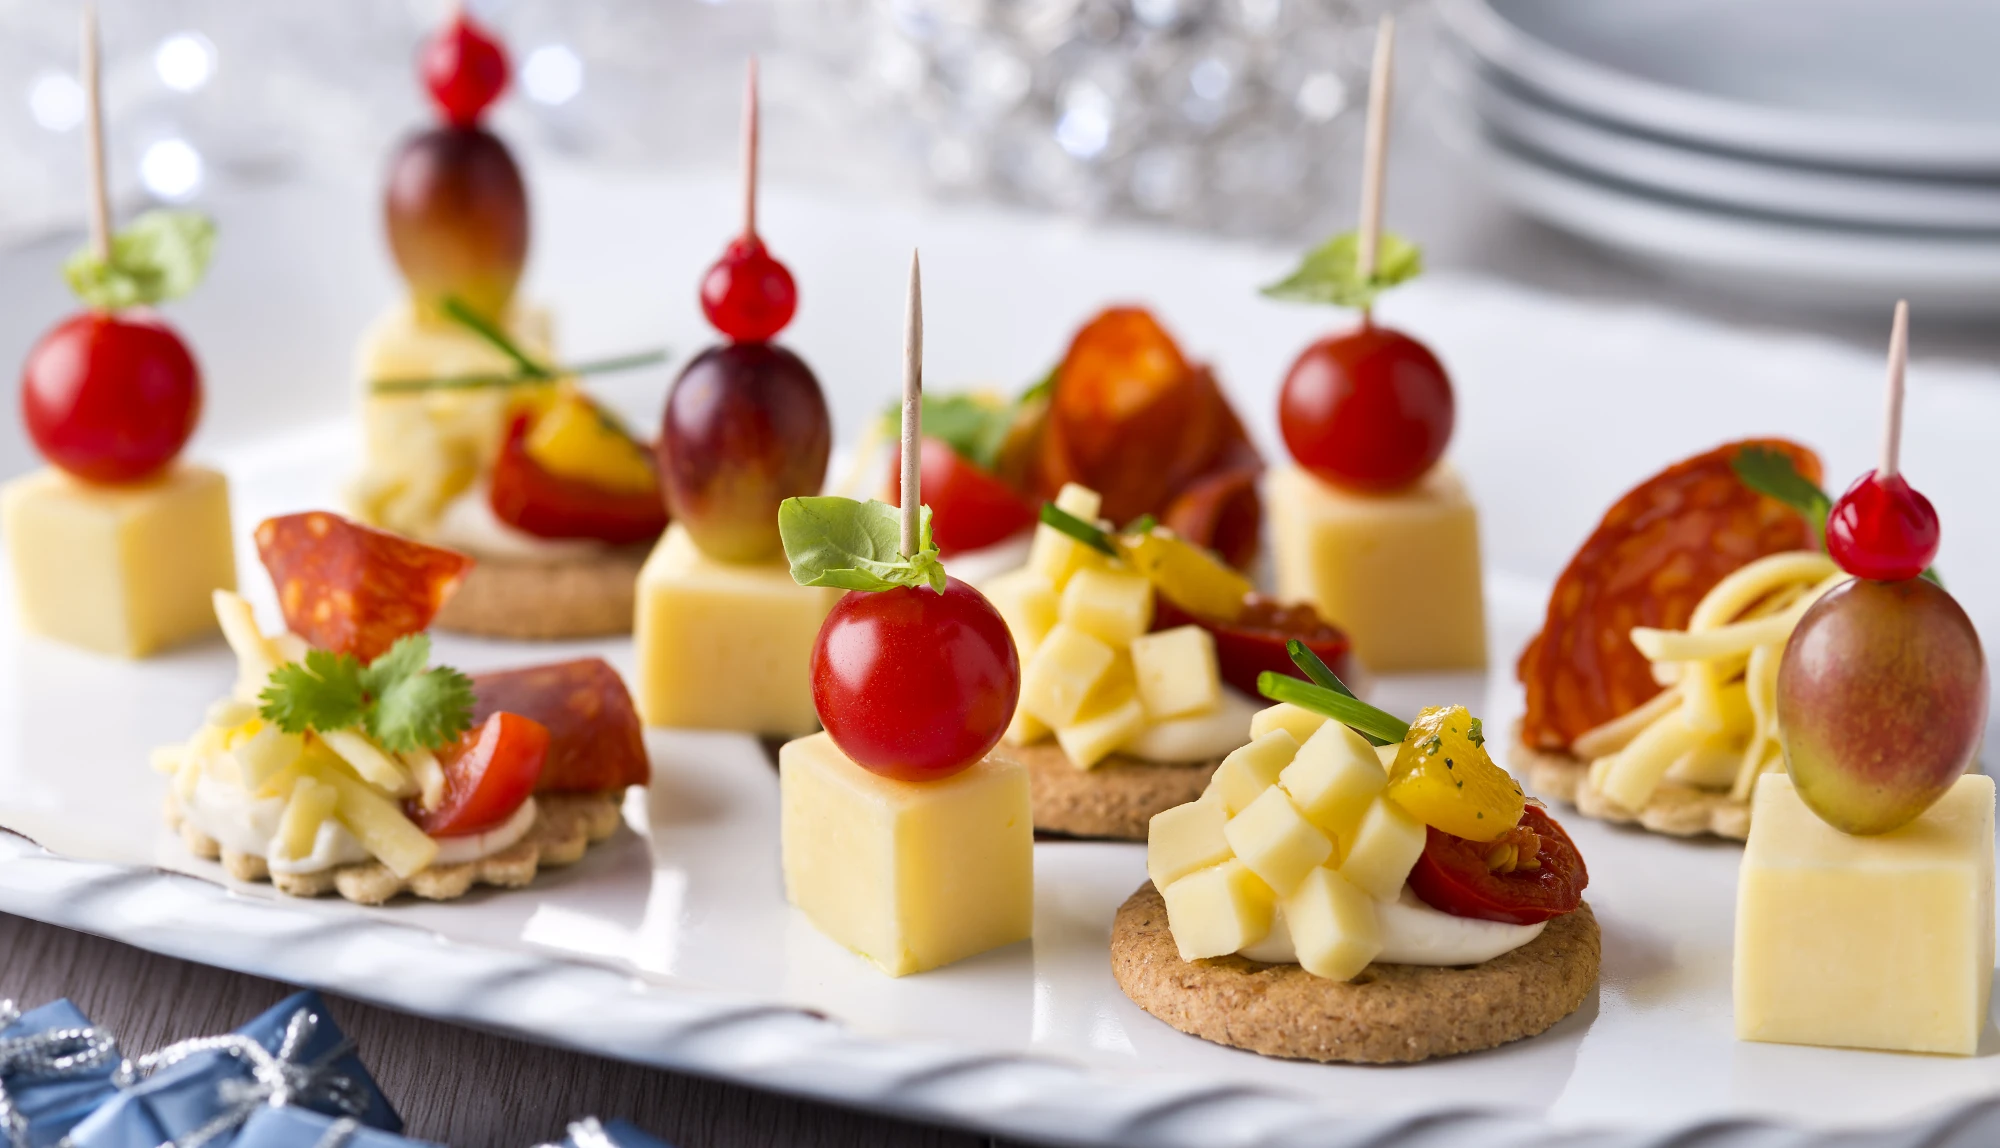 Festive canapes | Dairy Council, Northern Ireland